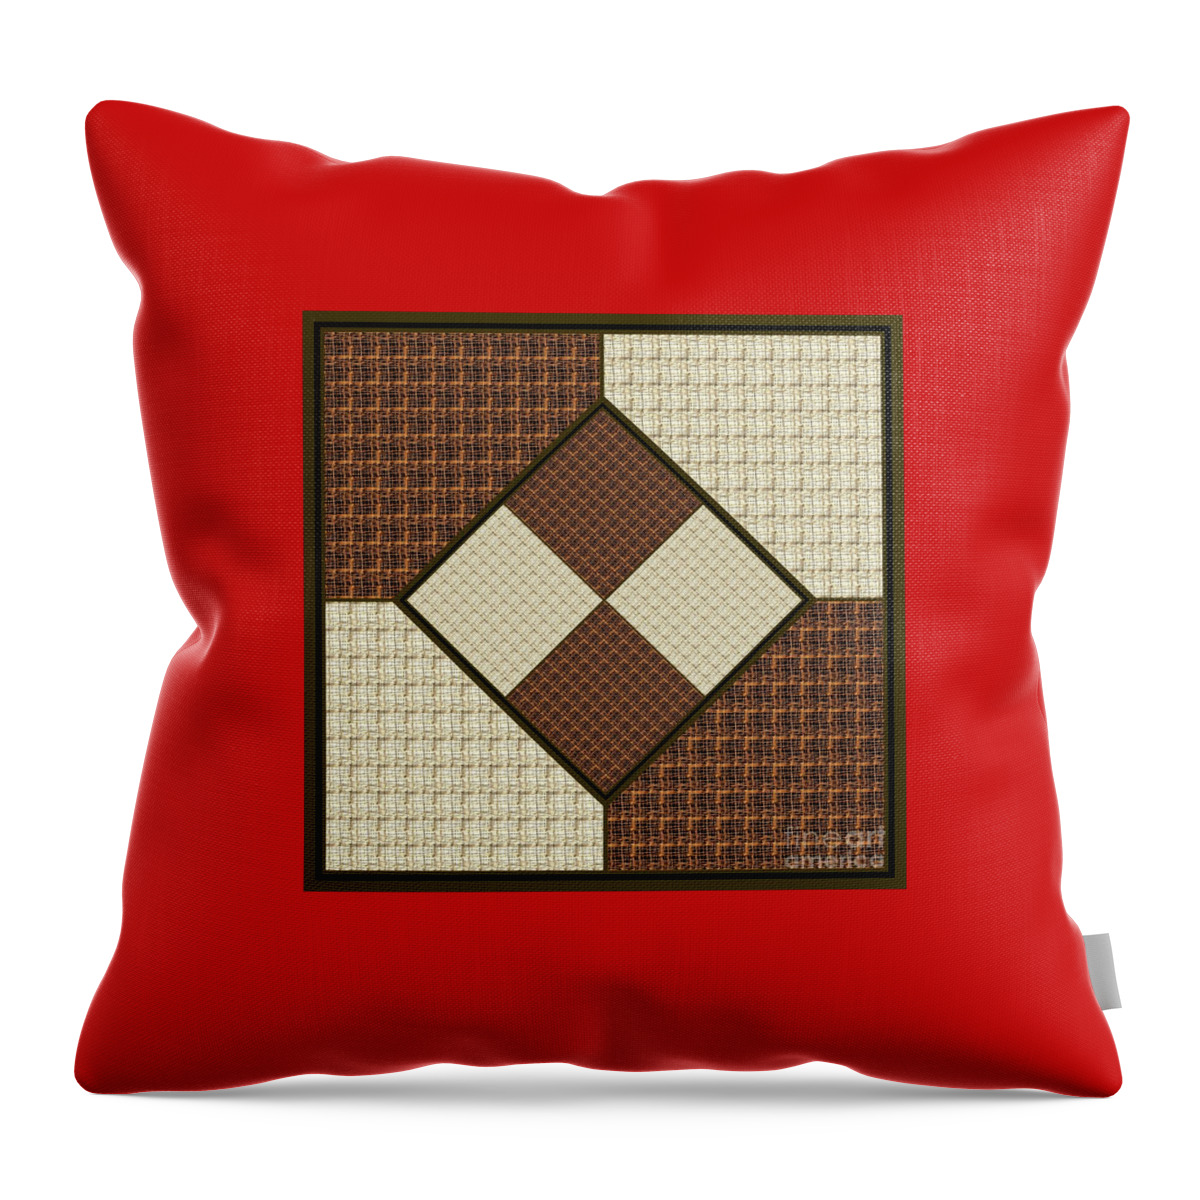 Brown And Tan Throw Pillow featuring the digital art Brown and Tan Neutral Textured for Pillows by Delynn Addams